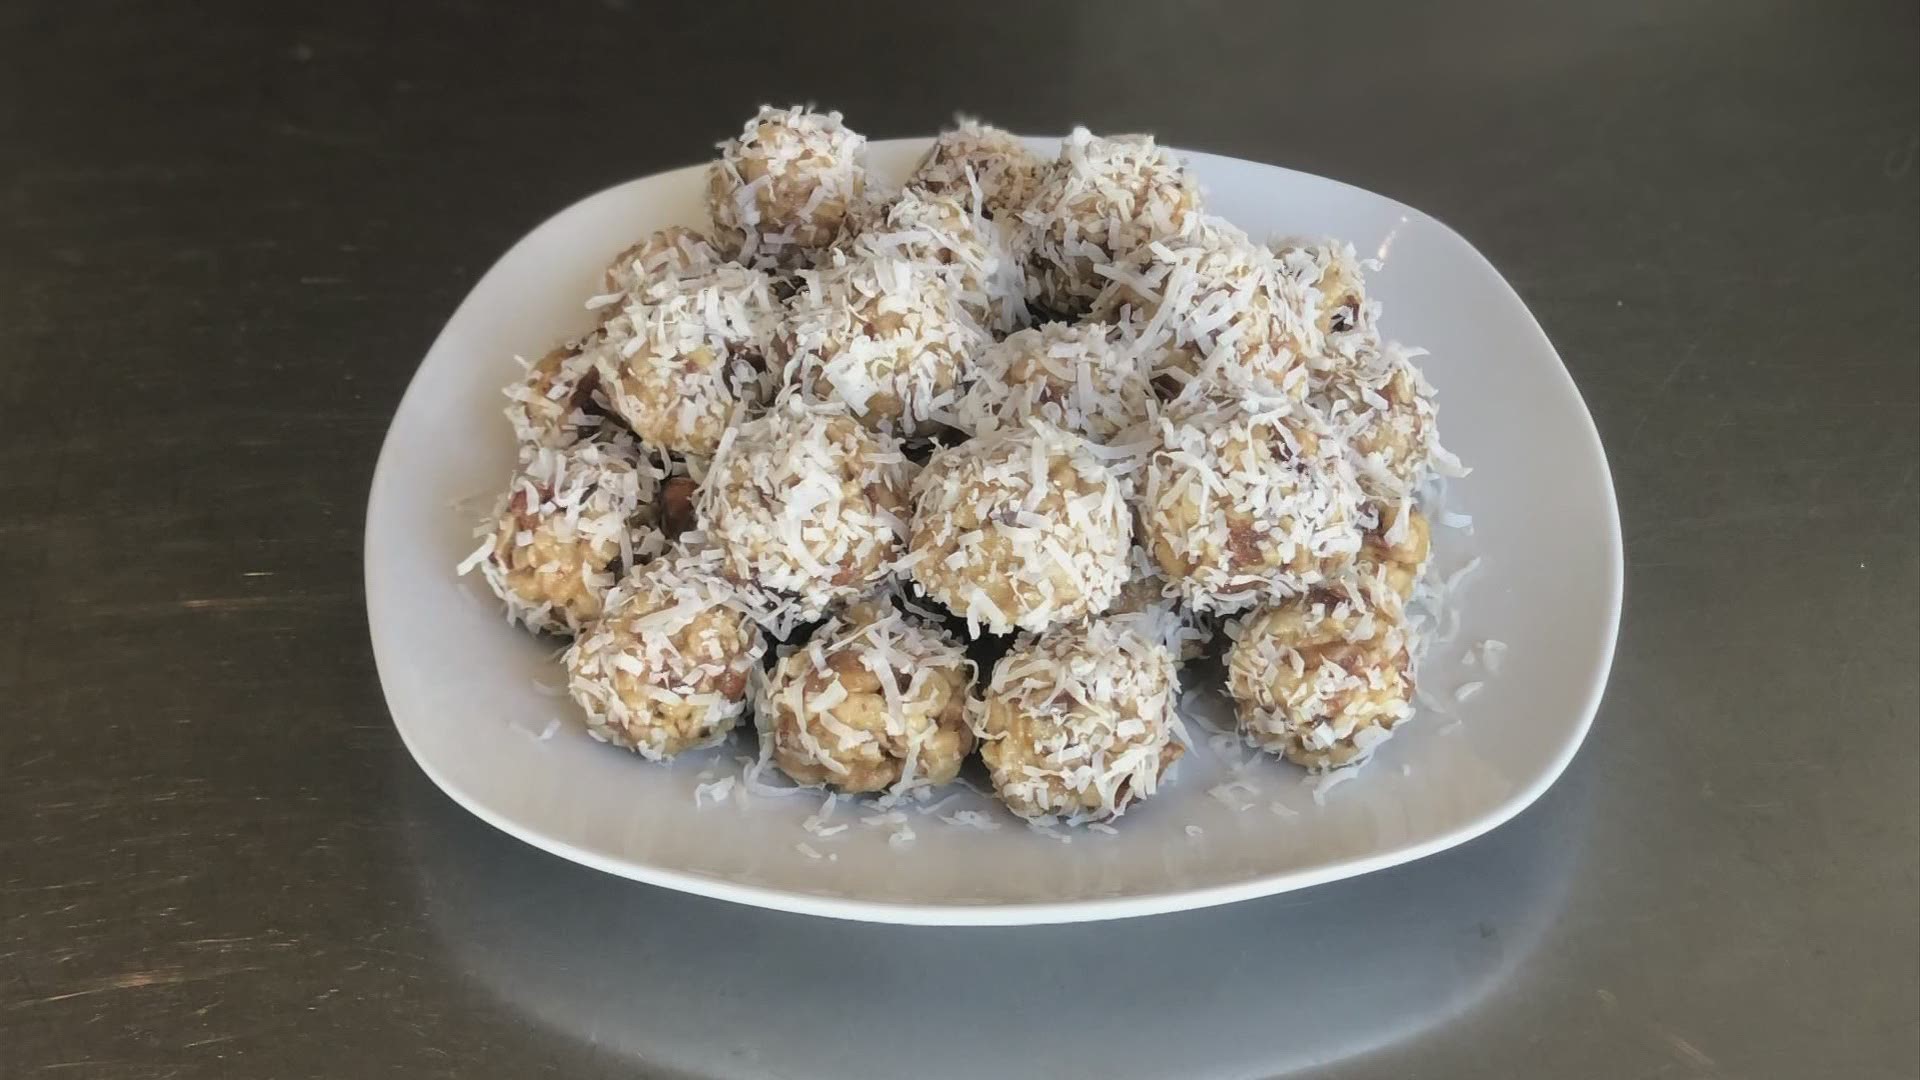 10TV's Brittany Bailey shares a tasty treat that let's you get creative with the crispy rice cereal you normally eat for breakfast.